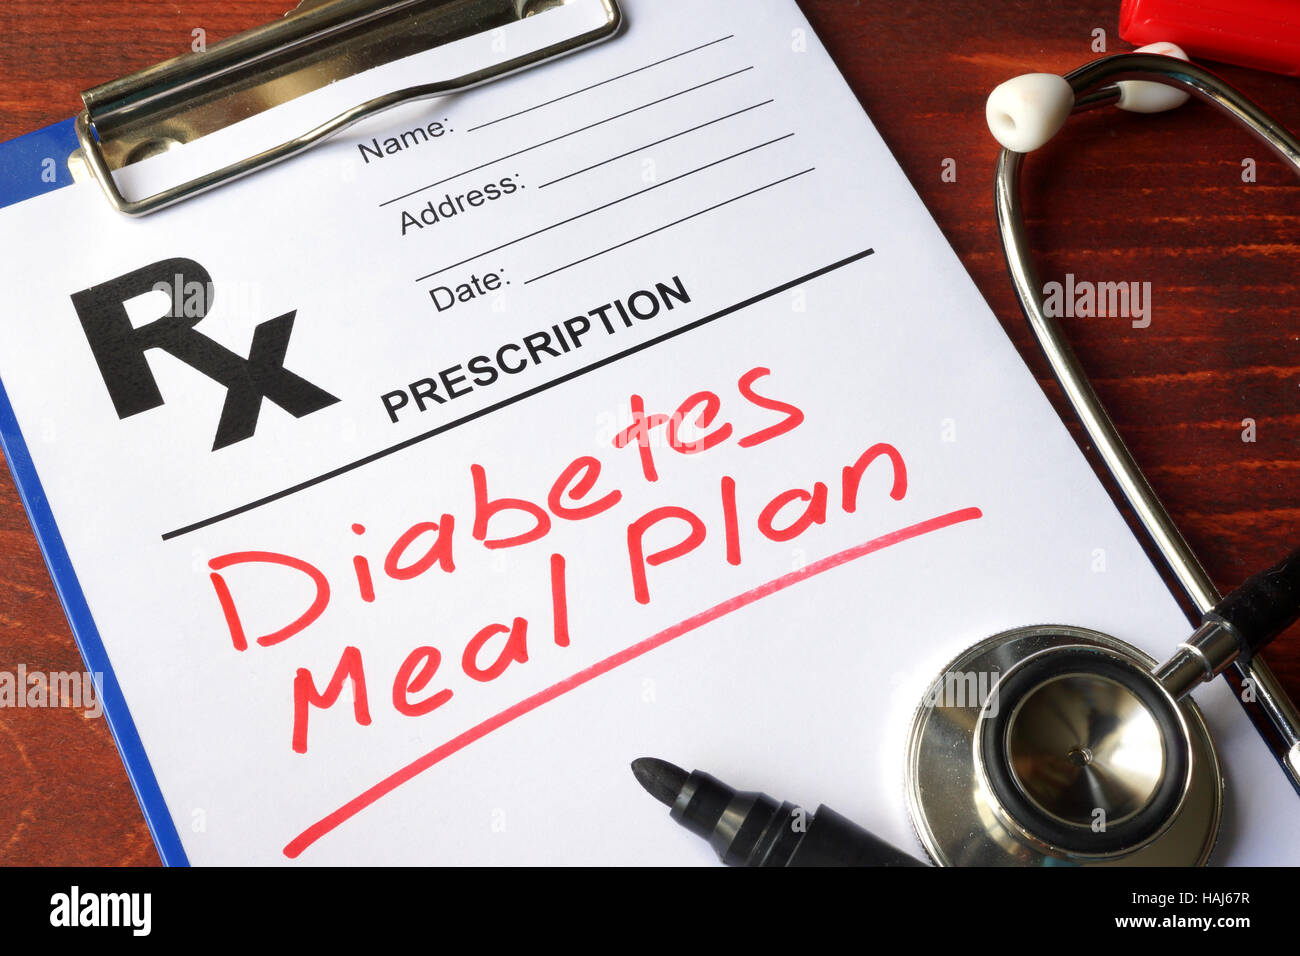 Prescription form with words Diabetes meal plan. Stock Photo